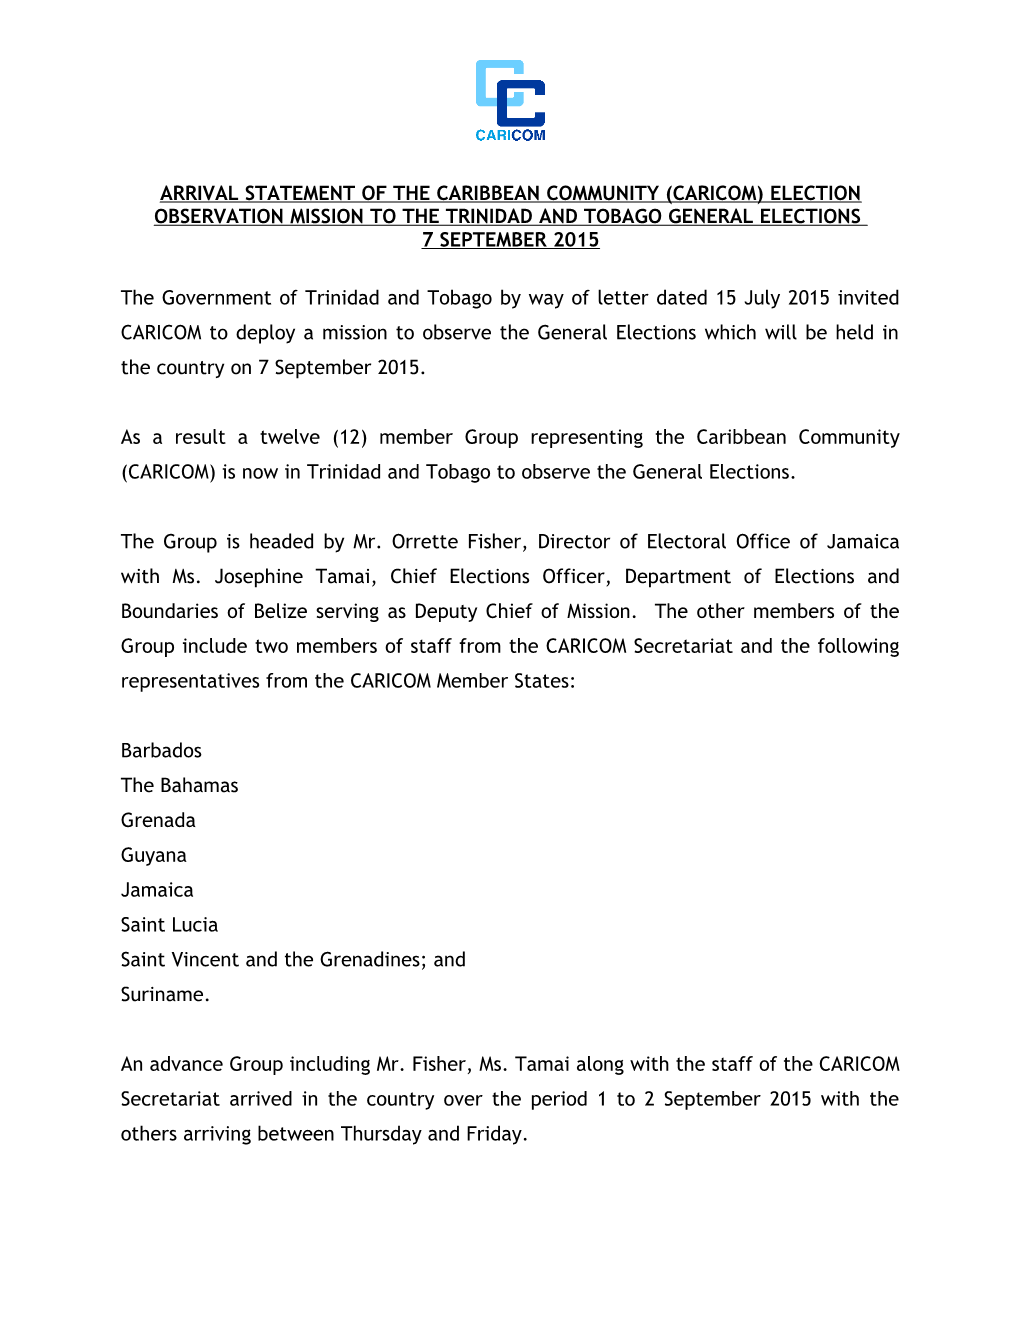 Arrival Statement of the Caribbean Community (Caricom) Election Observation Mission To